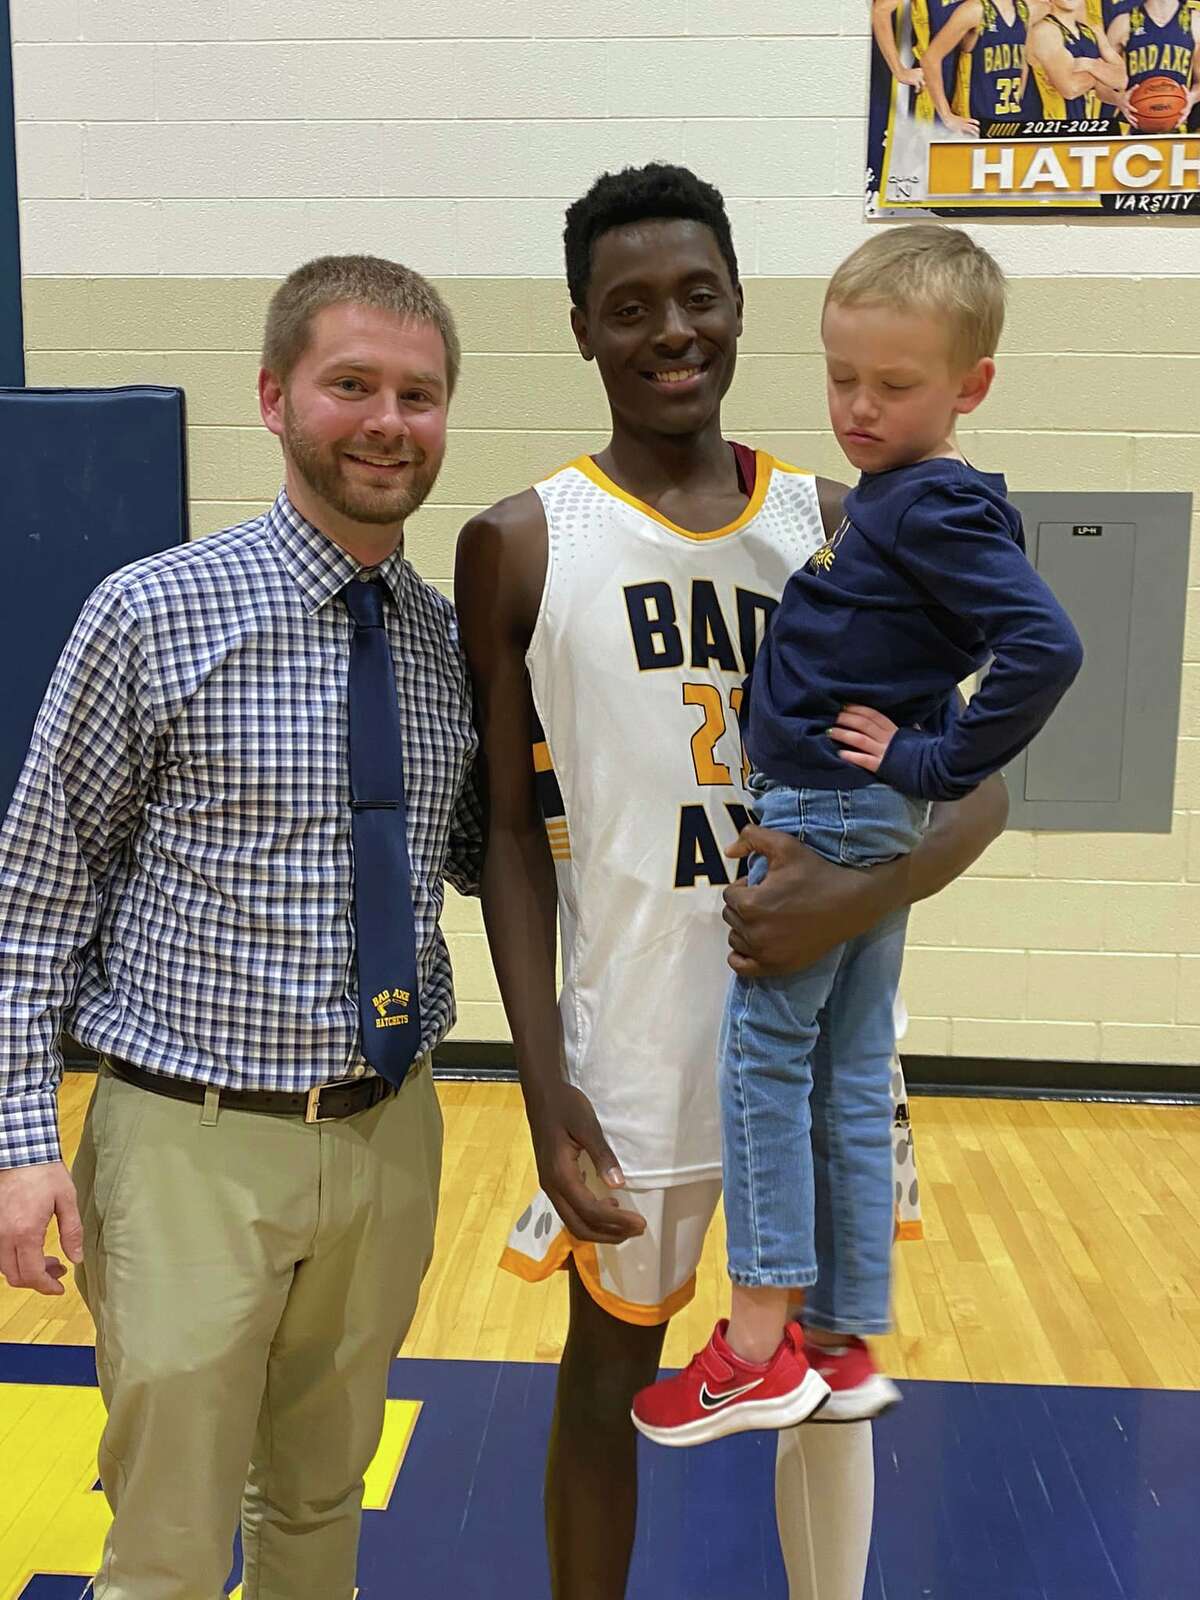 The Hatchets have hired Eric Glaza as their next basketball coach. Here, he is pictured with D'Carlos Sageman and "Coach Chase".